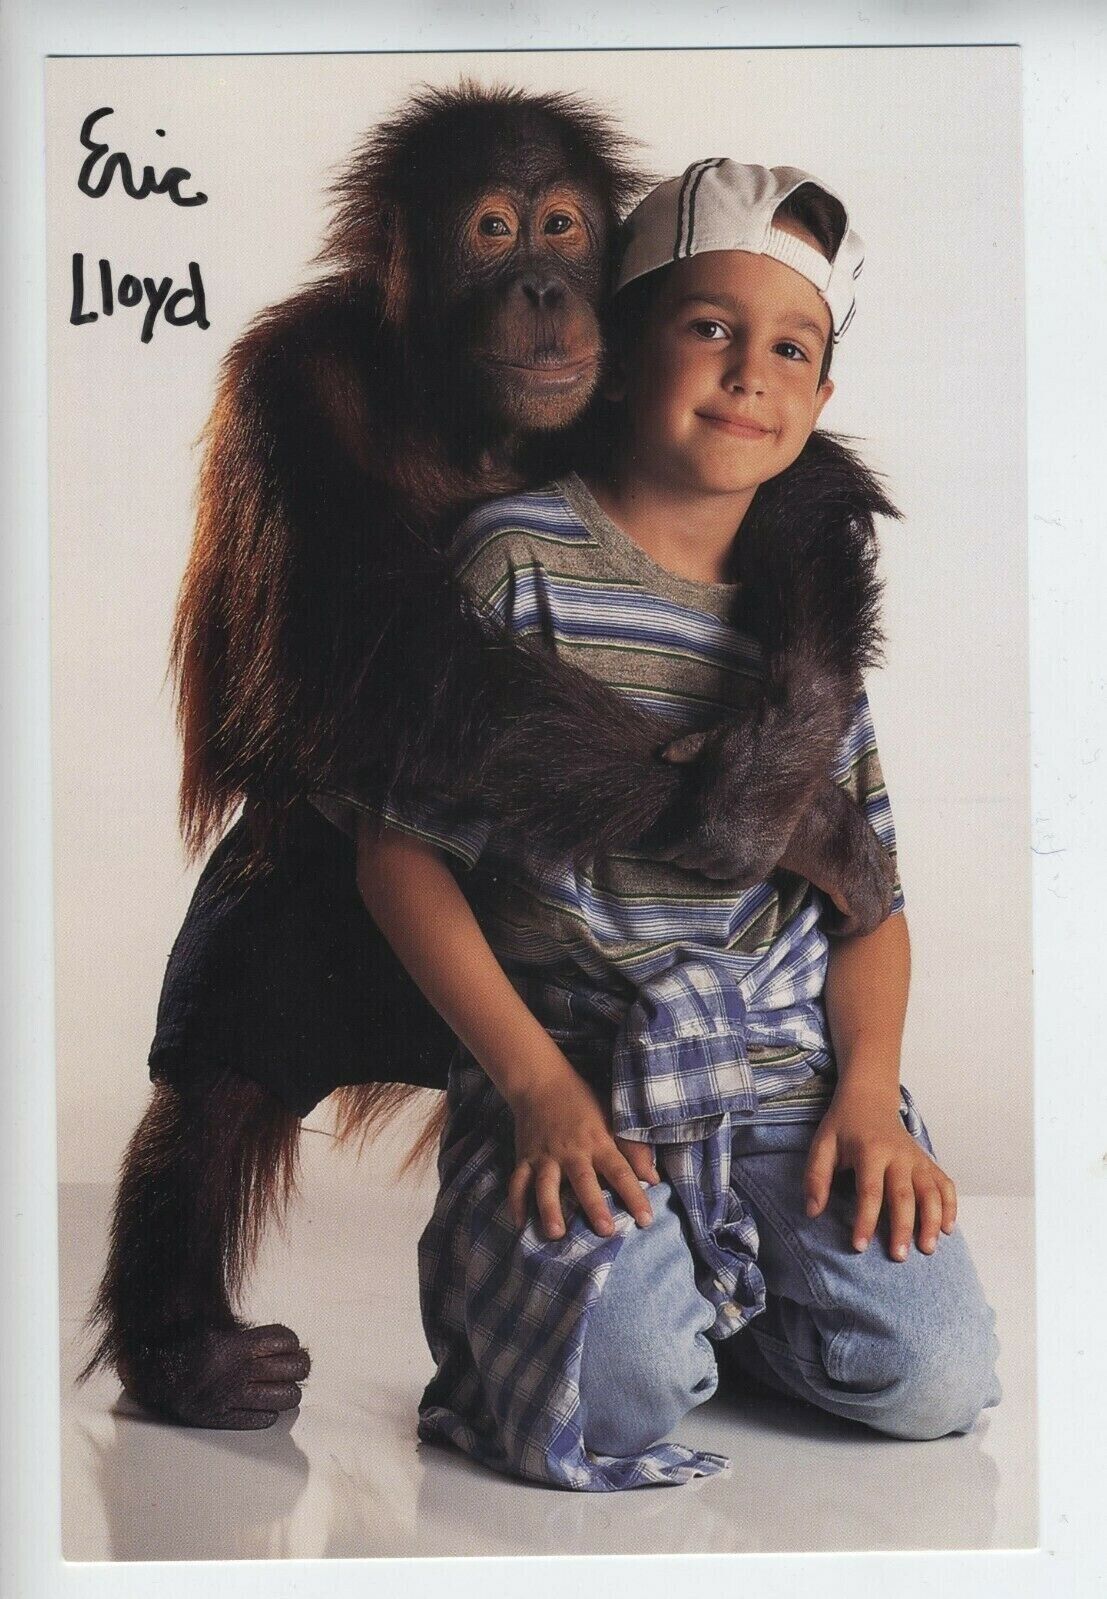 ERIC LLOYD CHILD ACTOR SIGNED PHOTO DUNSTON CHECKS IN PROMO ACTOR VINTAGE